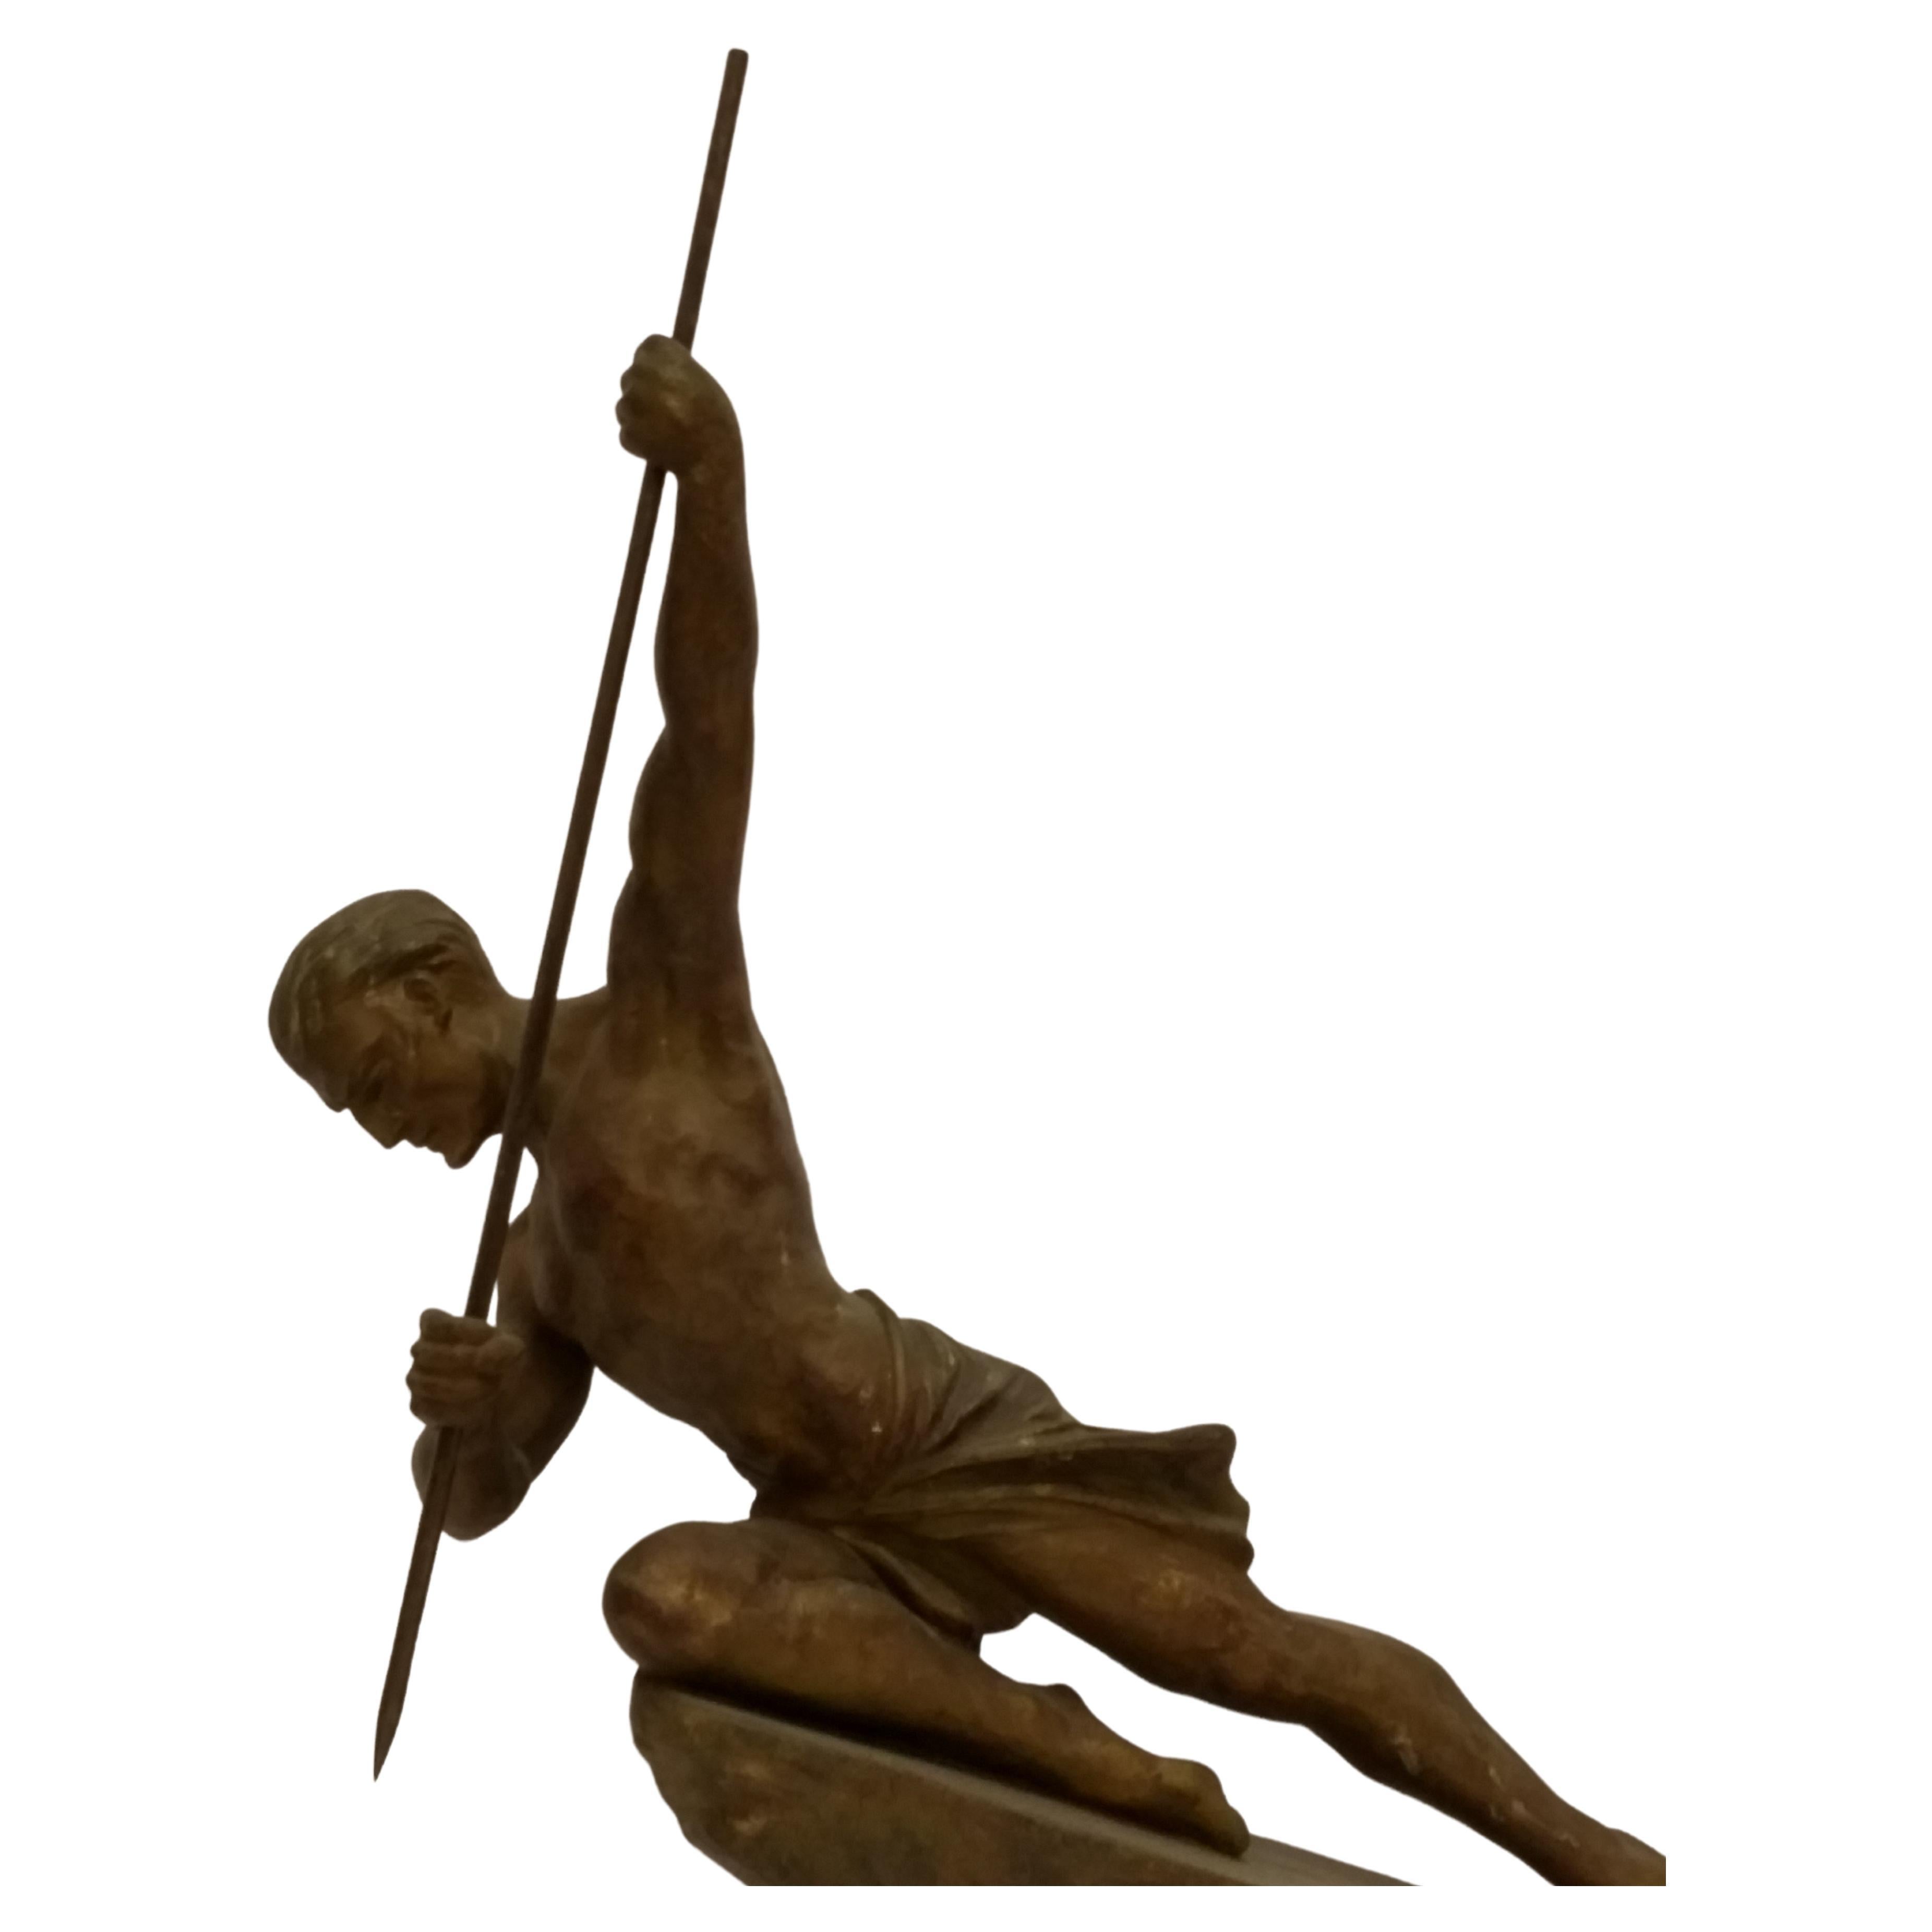 A French Art Deco hunter with a spear sculpture in green golden patina by the French artist R. Varnier. In great condition with modest wear commensurate with age. We are the rare source that has specialized in French Art Deco for over three decades,